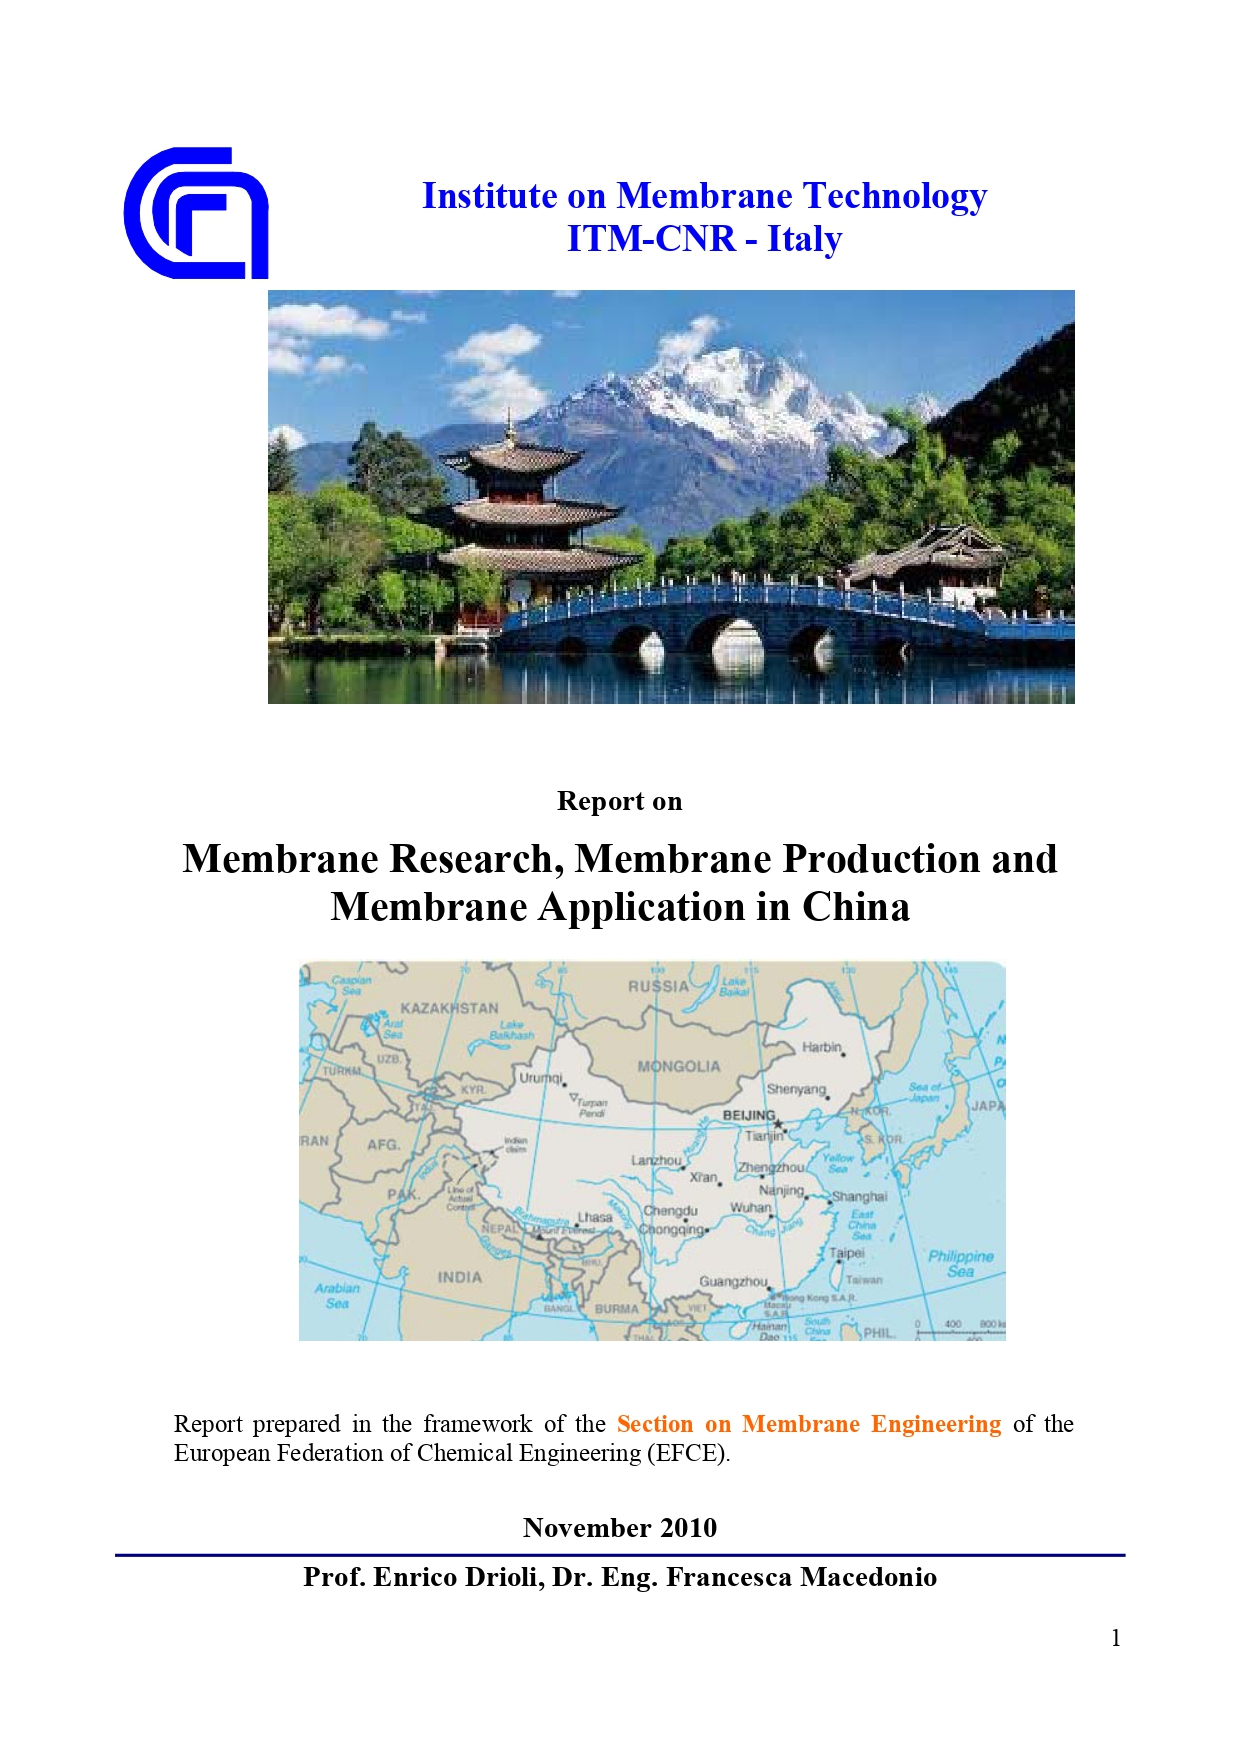 Membrane Research, Membrane Production and Membrane Application in China